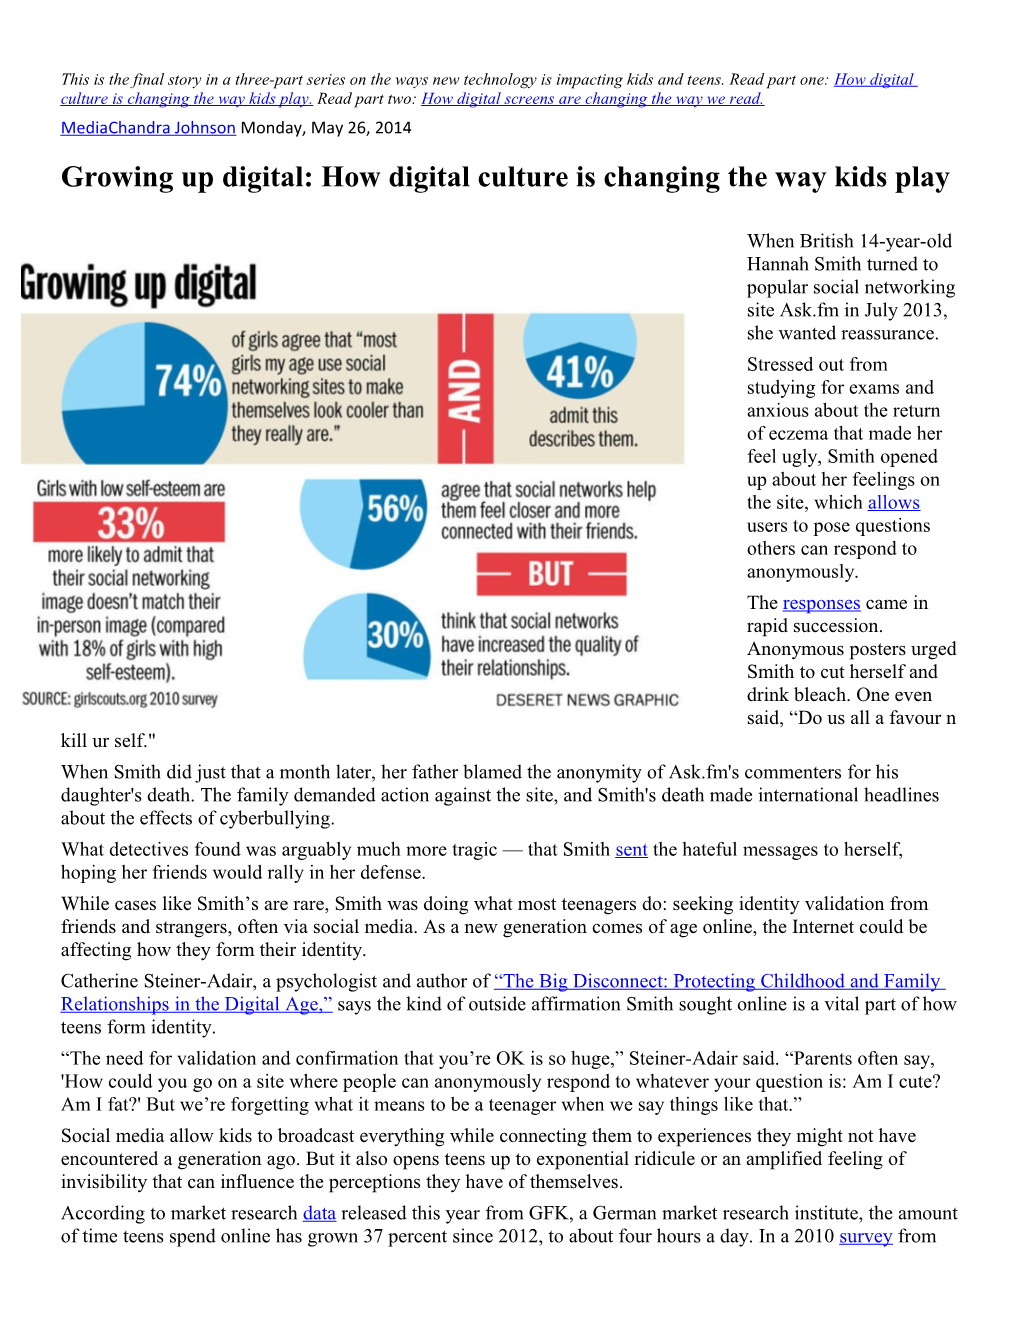 Growing up Digital: How Digital Culture Is Changing the Way Kids Play